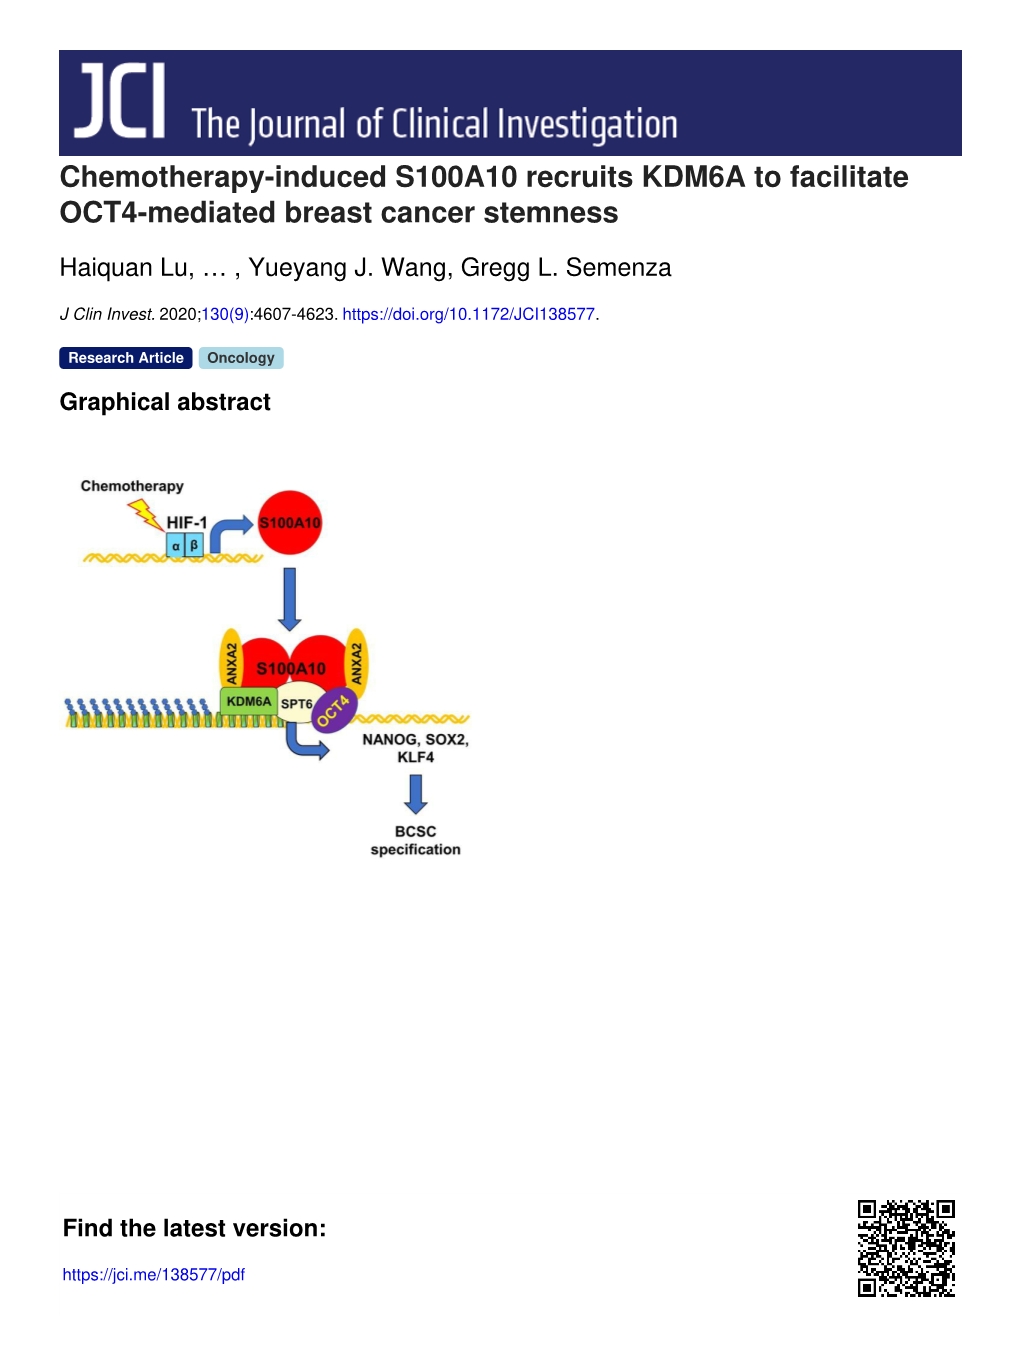 Chemotherapy-Induced S100A10 Recruits KDM6A to Facilitate OCT4-Mediated Breast Cancer Stemness